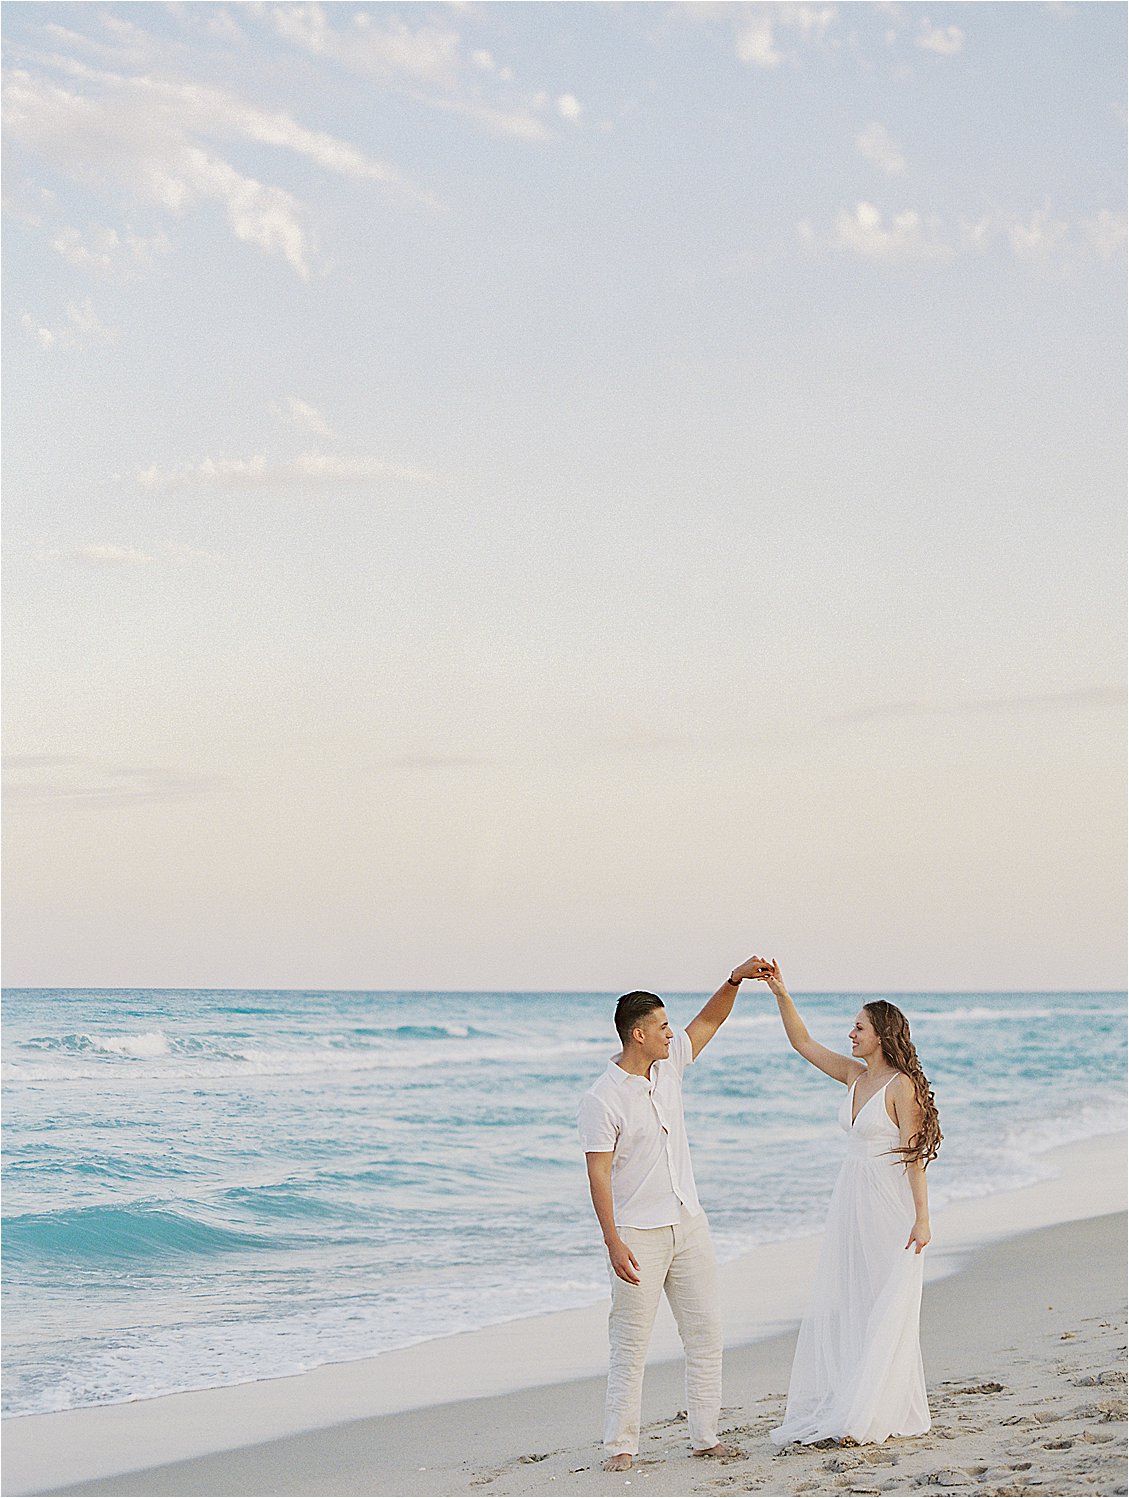 Dancing on the beach during golden hour with film wedding photographer, Renee Hollingshead